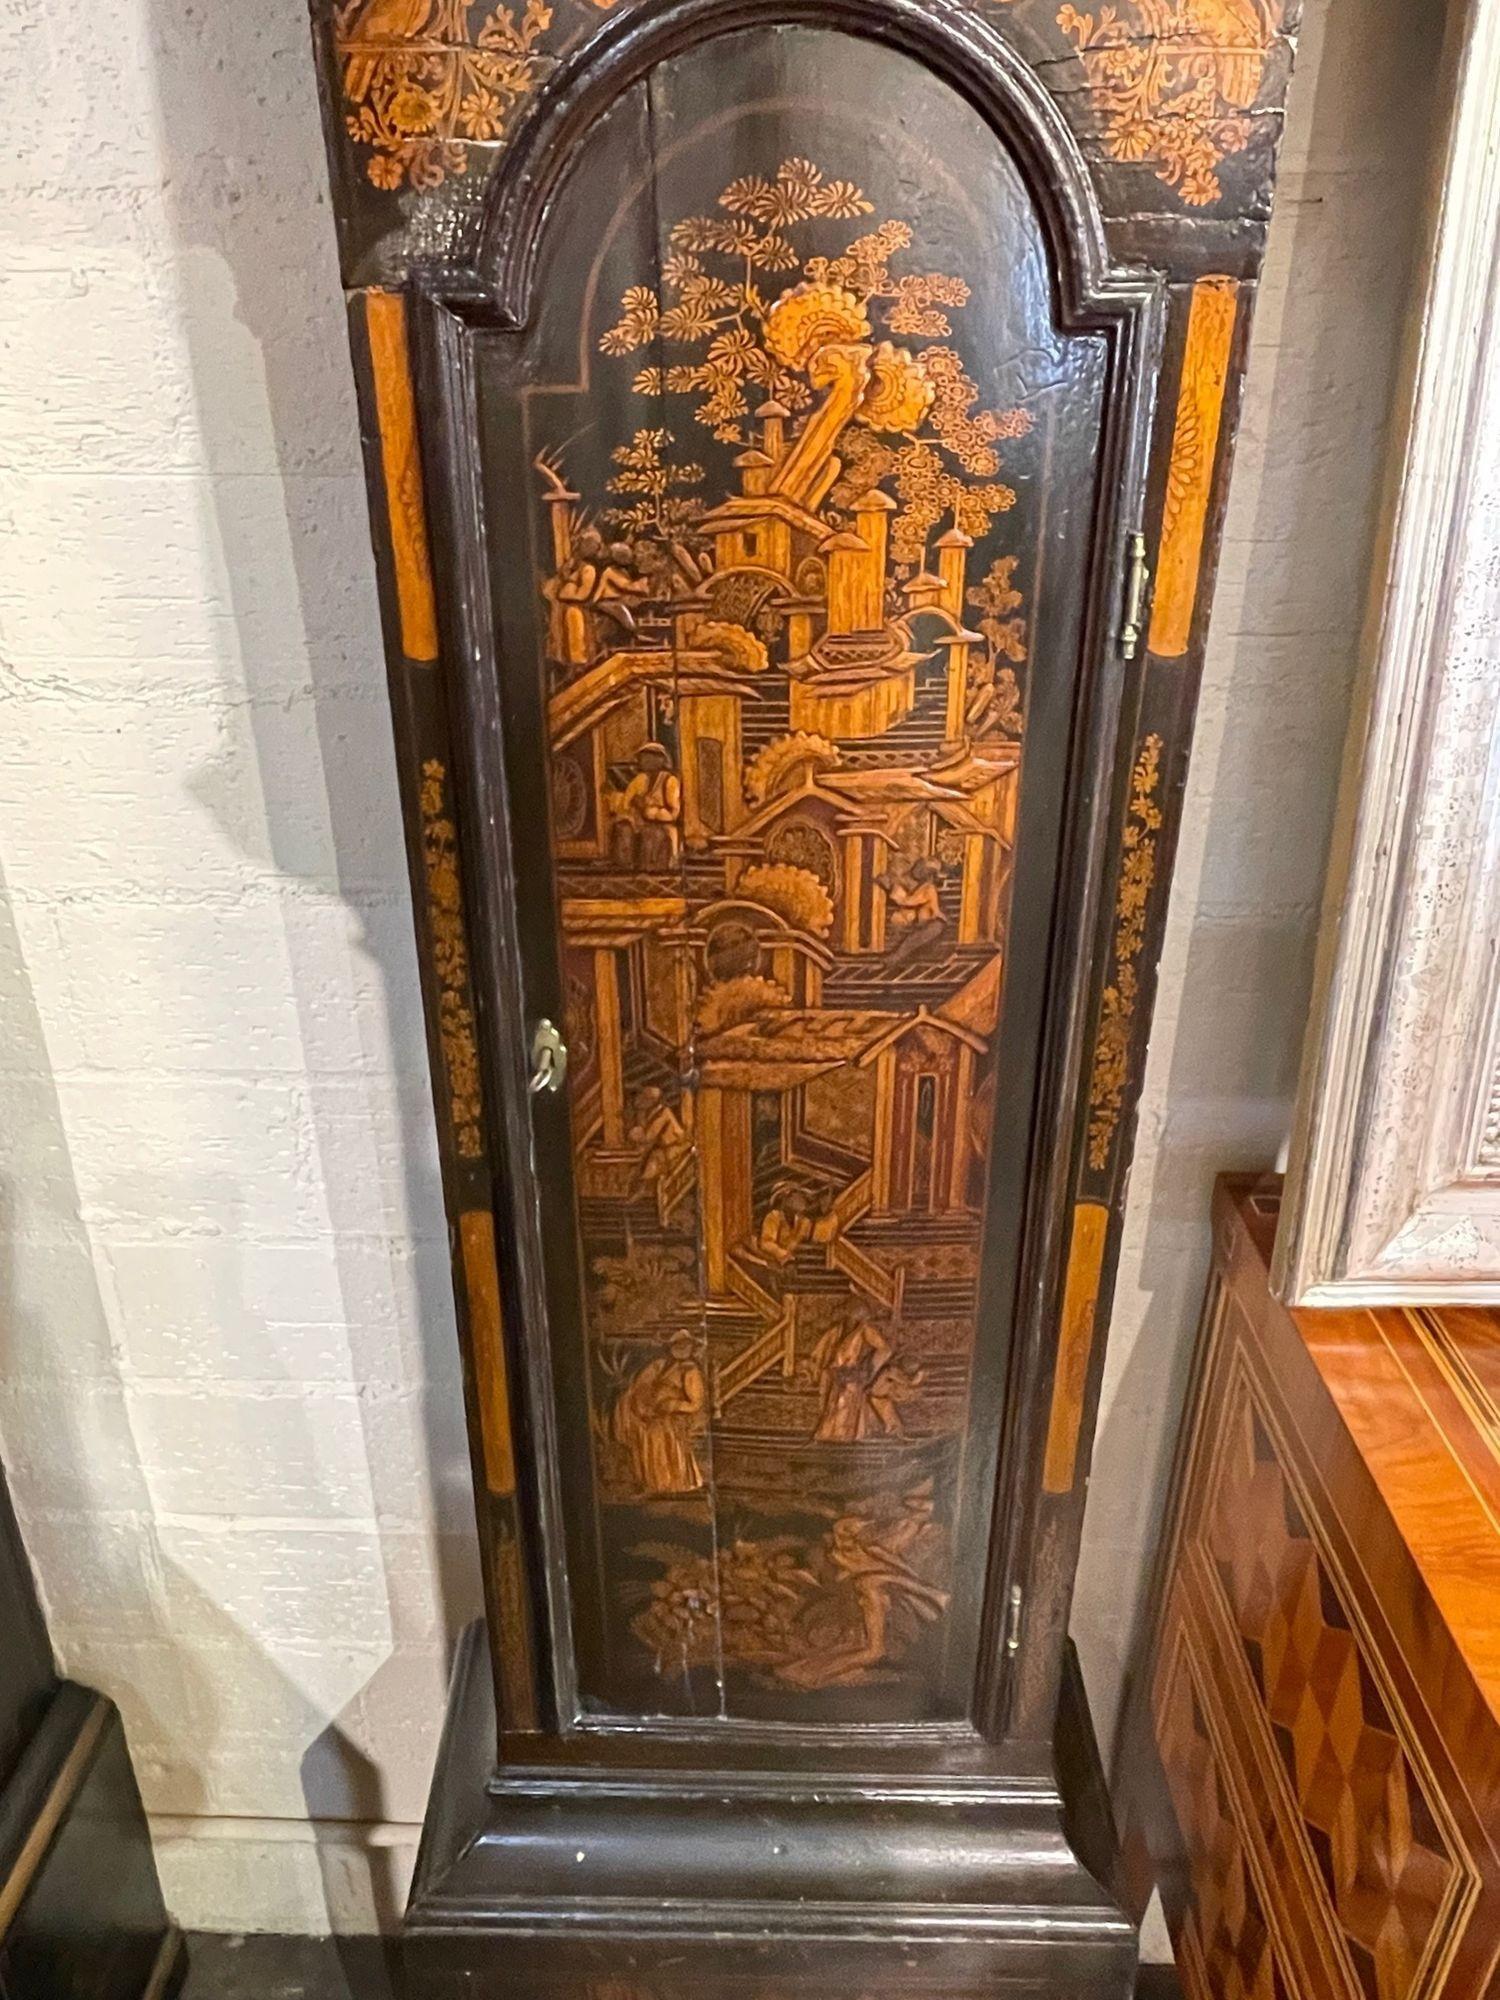 19th Century English Chinoiserie Decorated Tall Case Clock In Good Condition For Sale In Dallas, TX